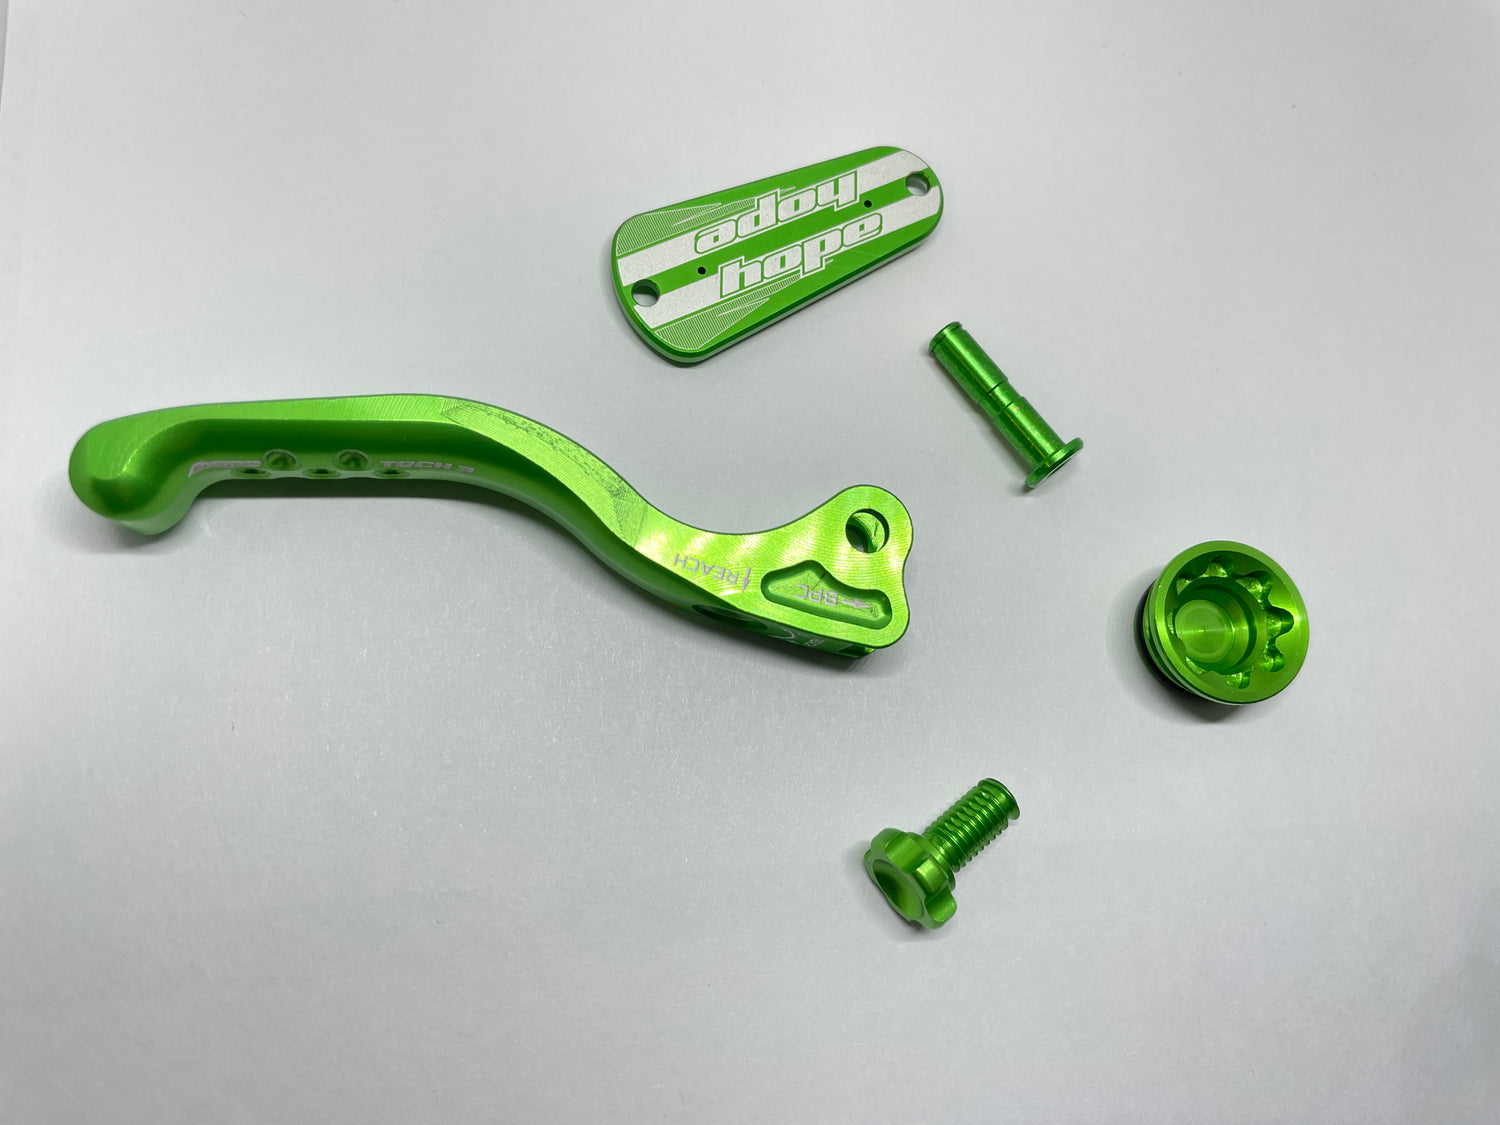 All Green Hope Parts - Team Factory Racing